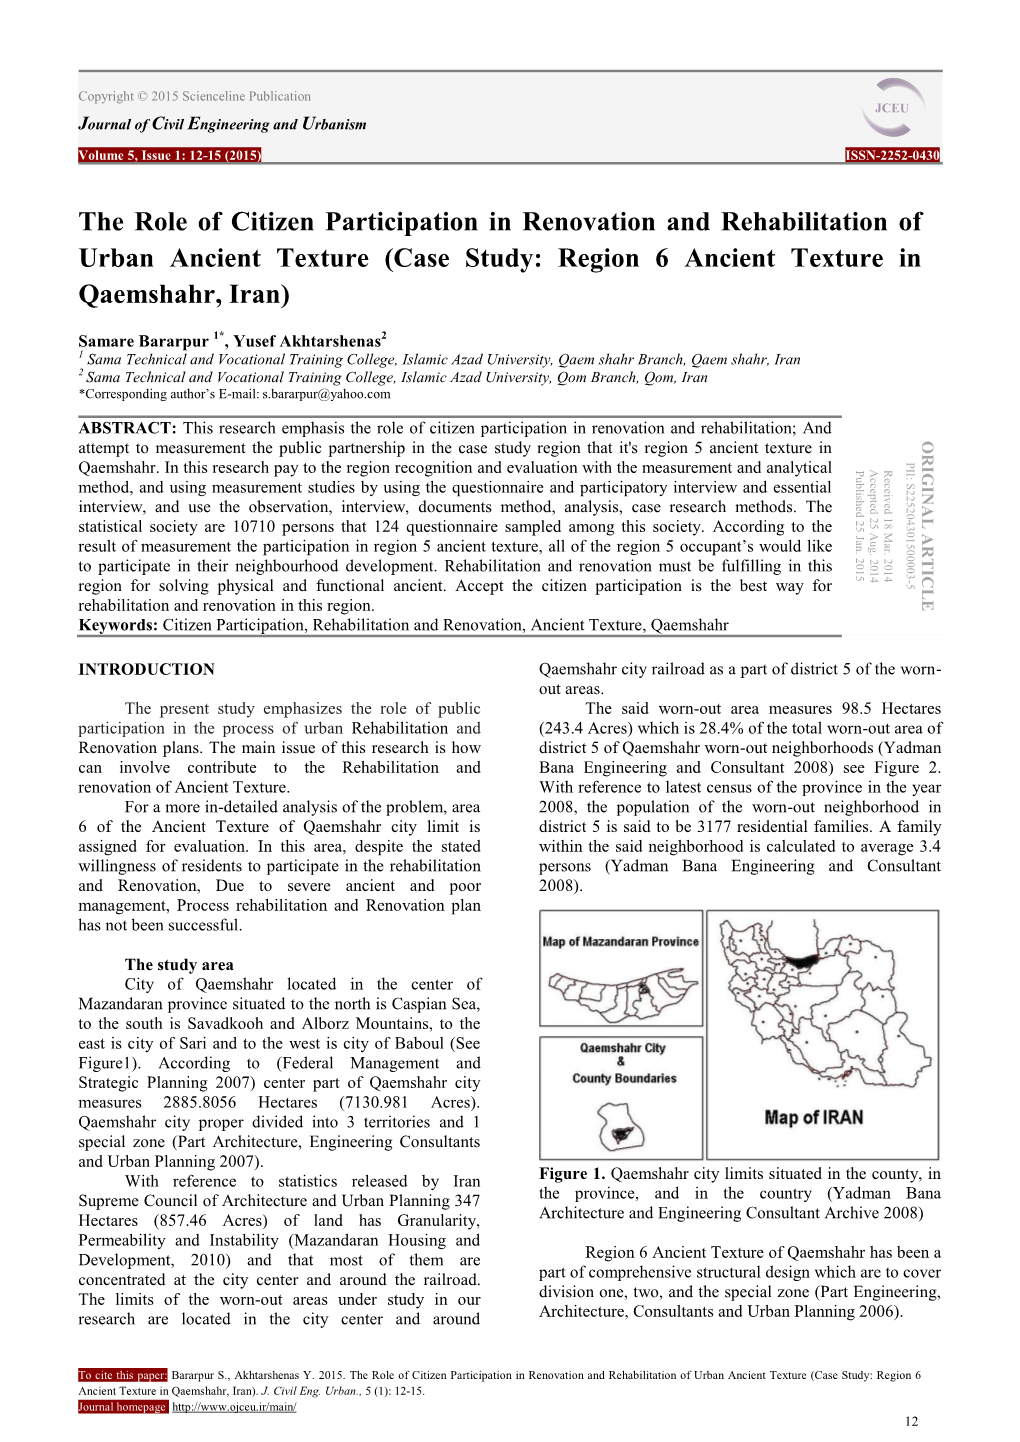 The Role of Citizen Participation in Renovation and Rehabilitation of Urban Ancient Texture (Case Study: Region 6 Ancient Texture in Qaemshahr, Iran)